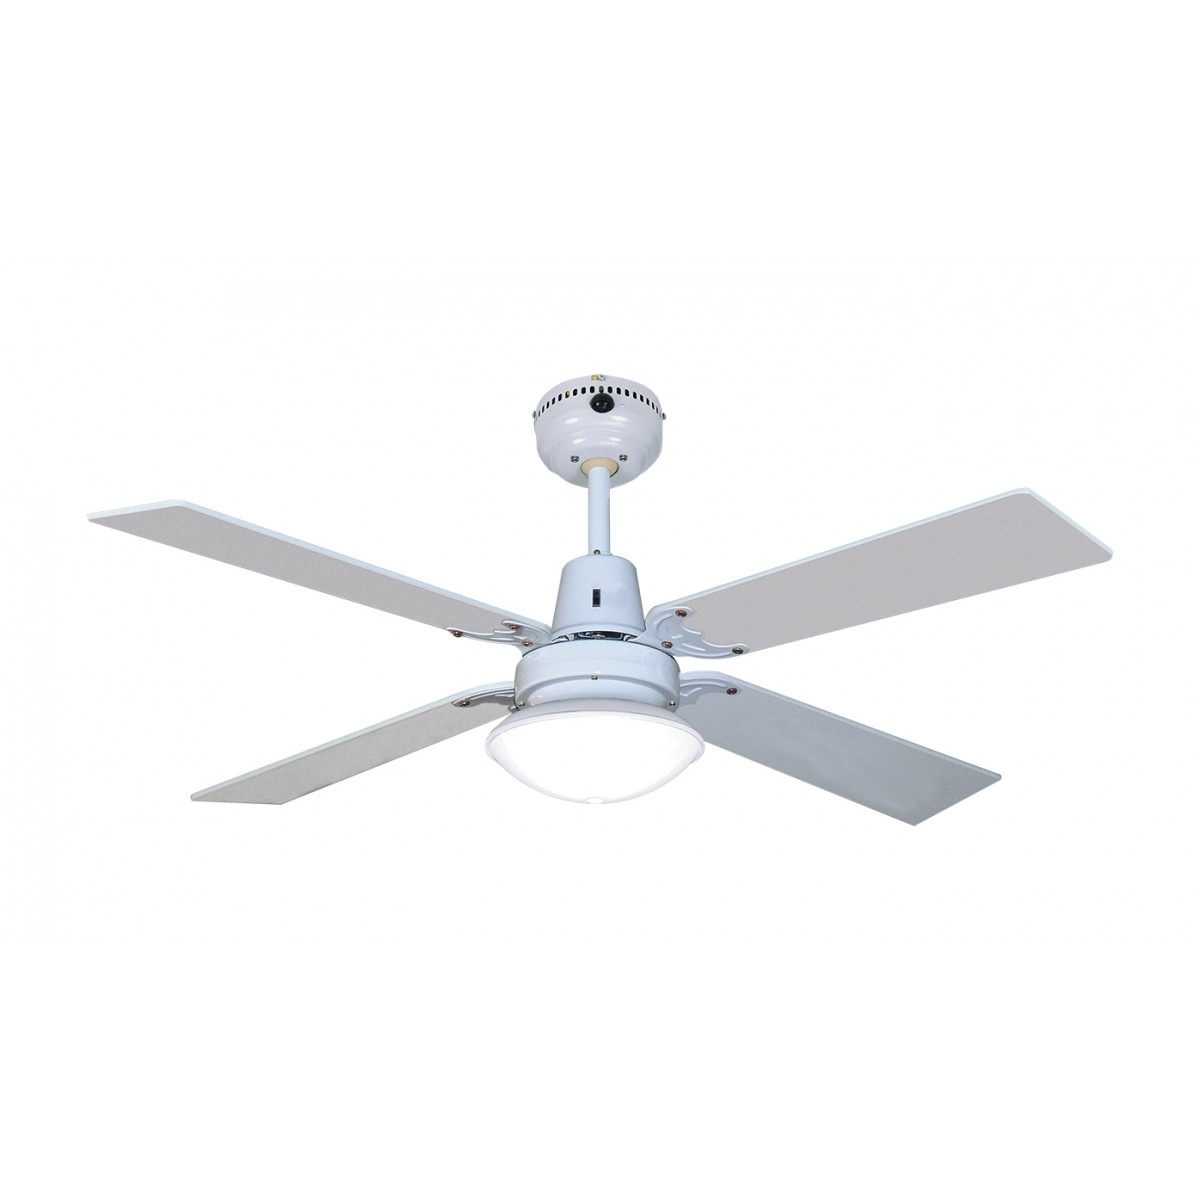 Permalink to Heller 4 Blade Sienna Ceiling Fan With Light & Remote